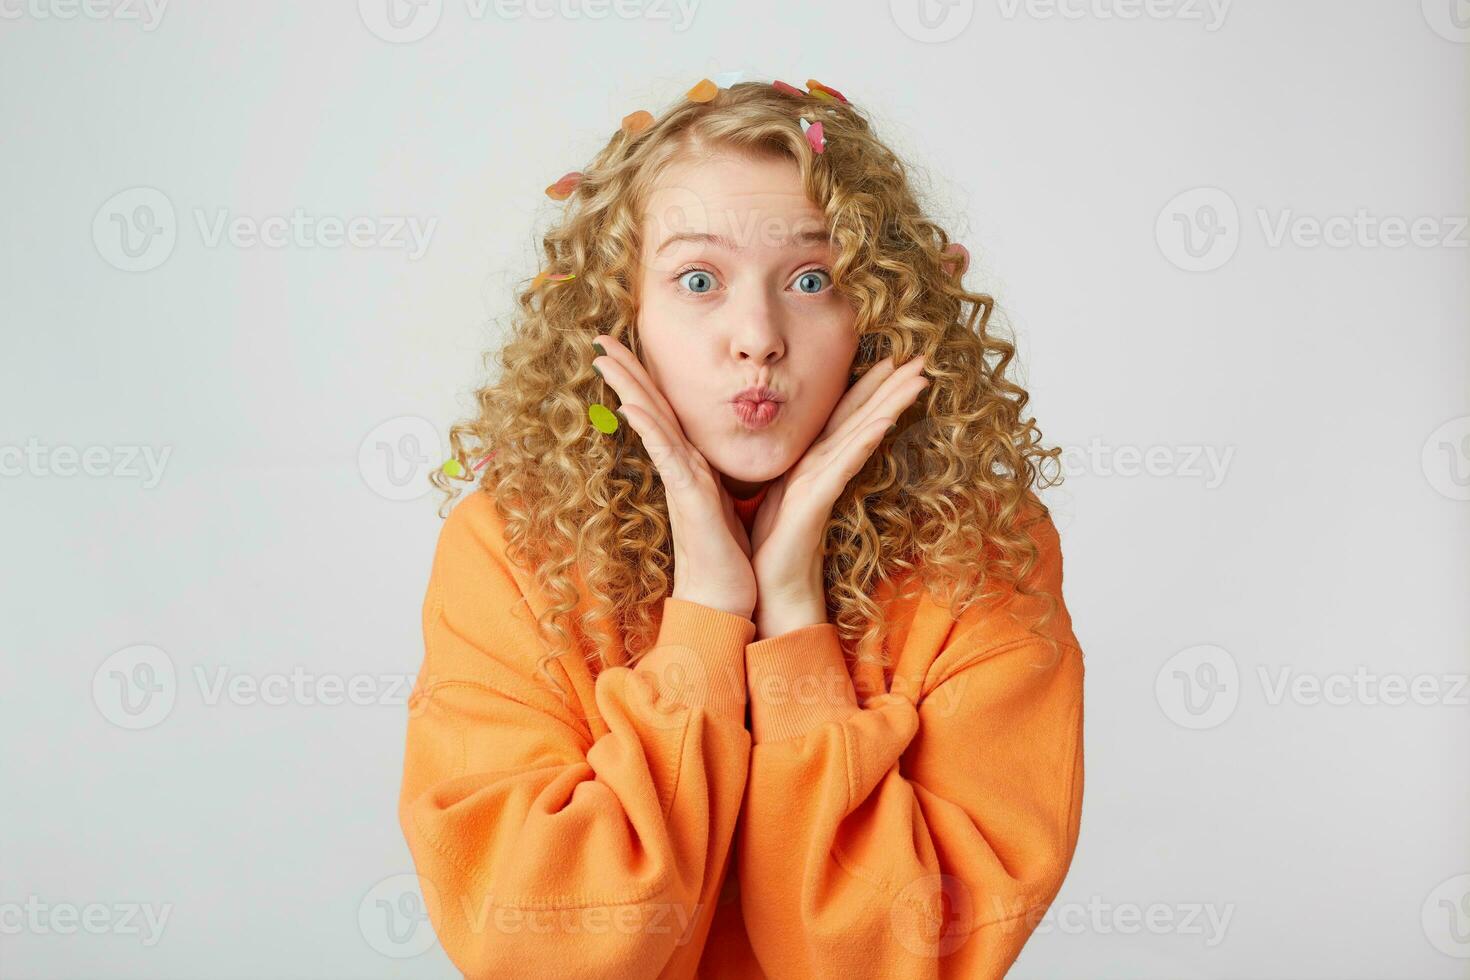 Lovely tender nice girl blows air kiss, keeps palms near face as if demonstrates it or tries to pay attention, dressed in oversized sweatshirt. People, body language and facial expressions concept photo